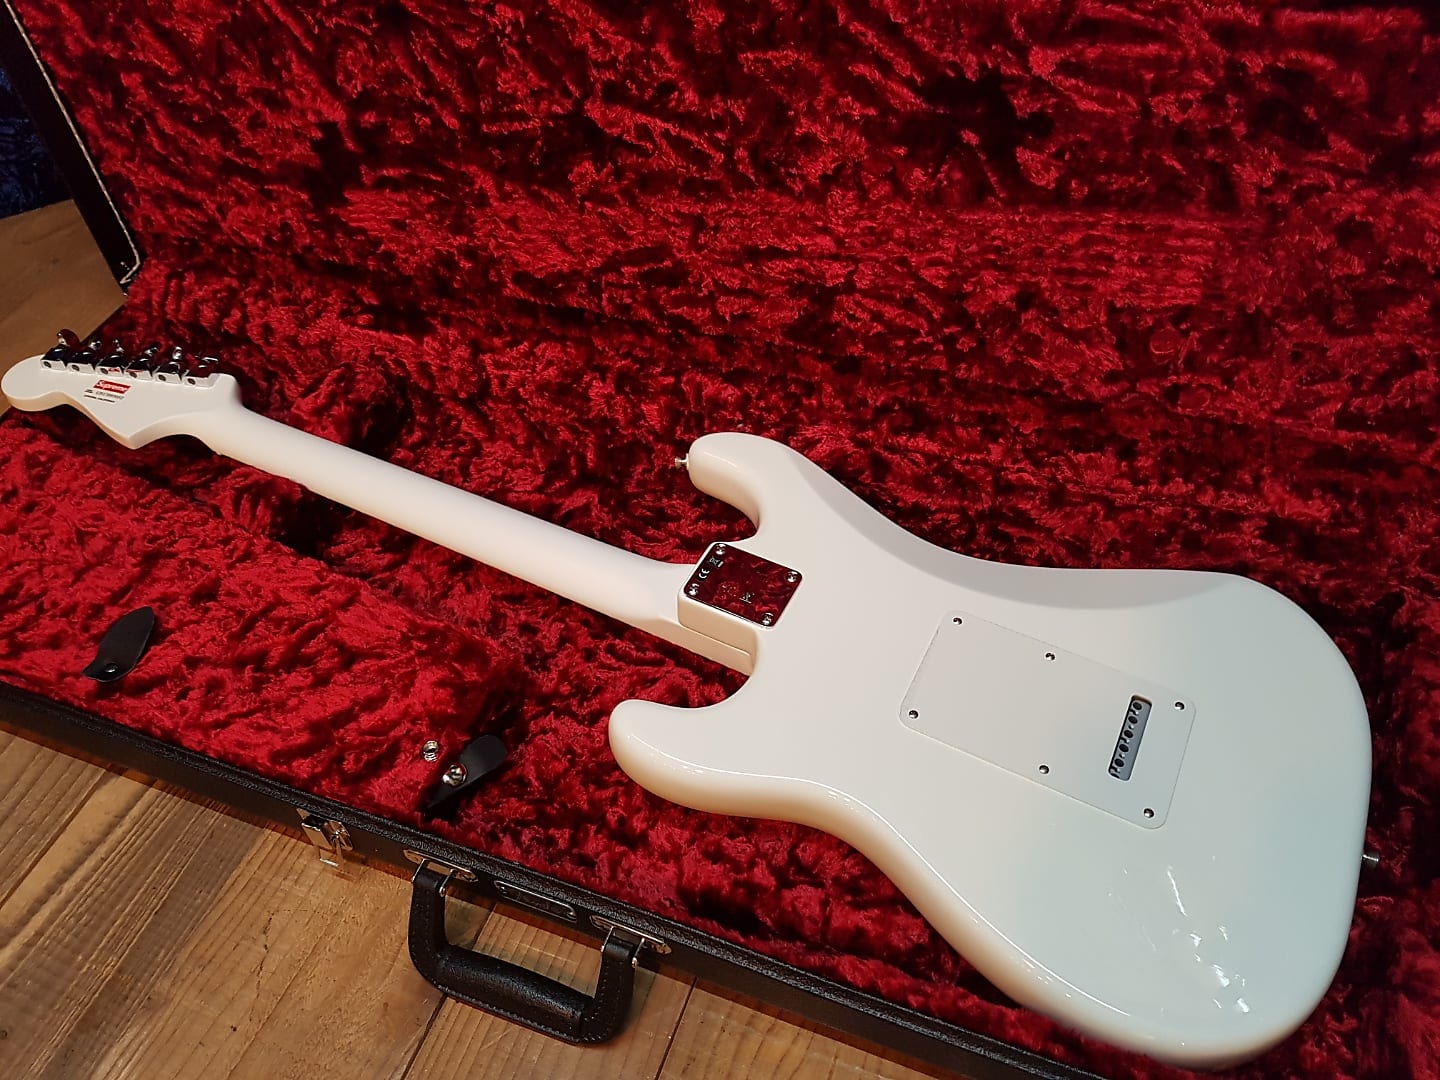 The back of the all-white Supreme Limited Edition Stratocaster. If only the guitar didn't have the darn red "Supreme" logo between the picks, which diminishes the guitar's immaculate beauty